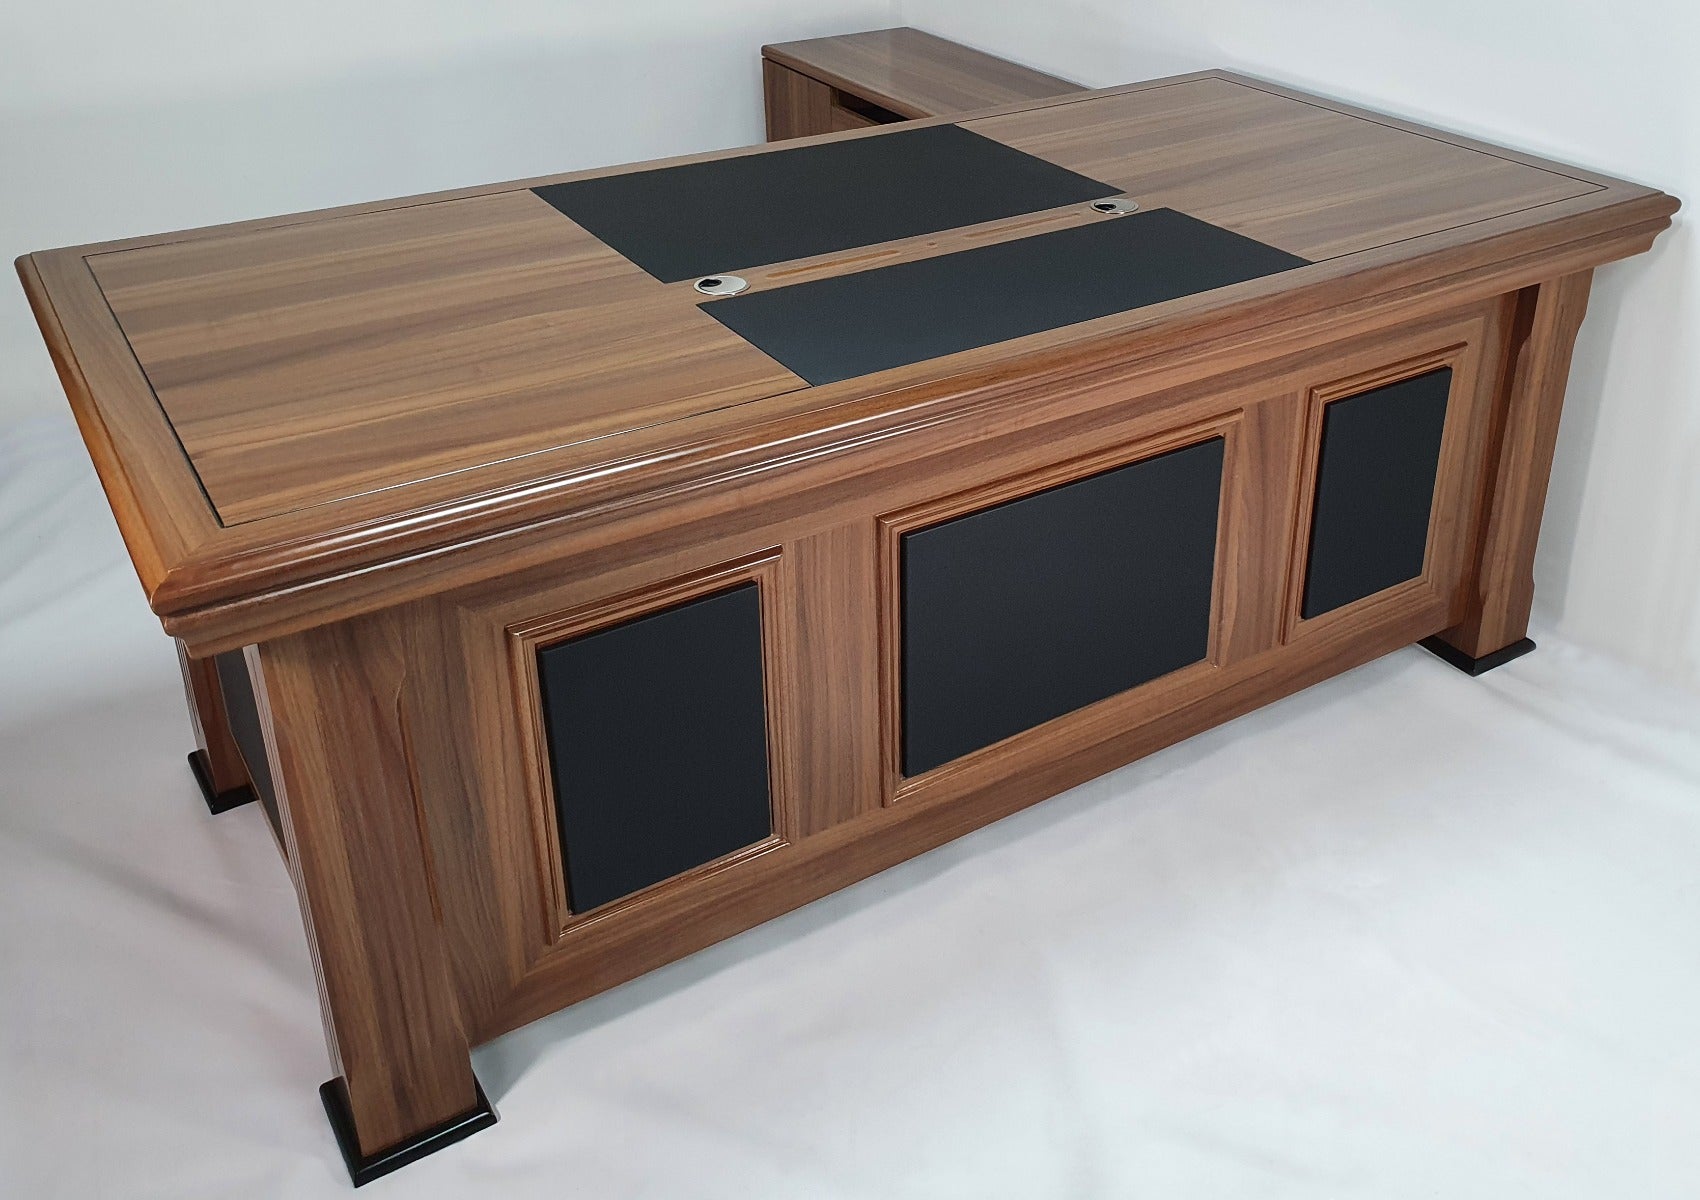 Light Oak Executive Desk With Leather Detailing - With Pedestal and Return - 2233 North Yorkshire